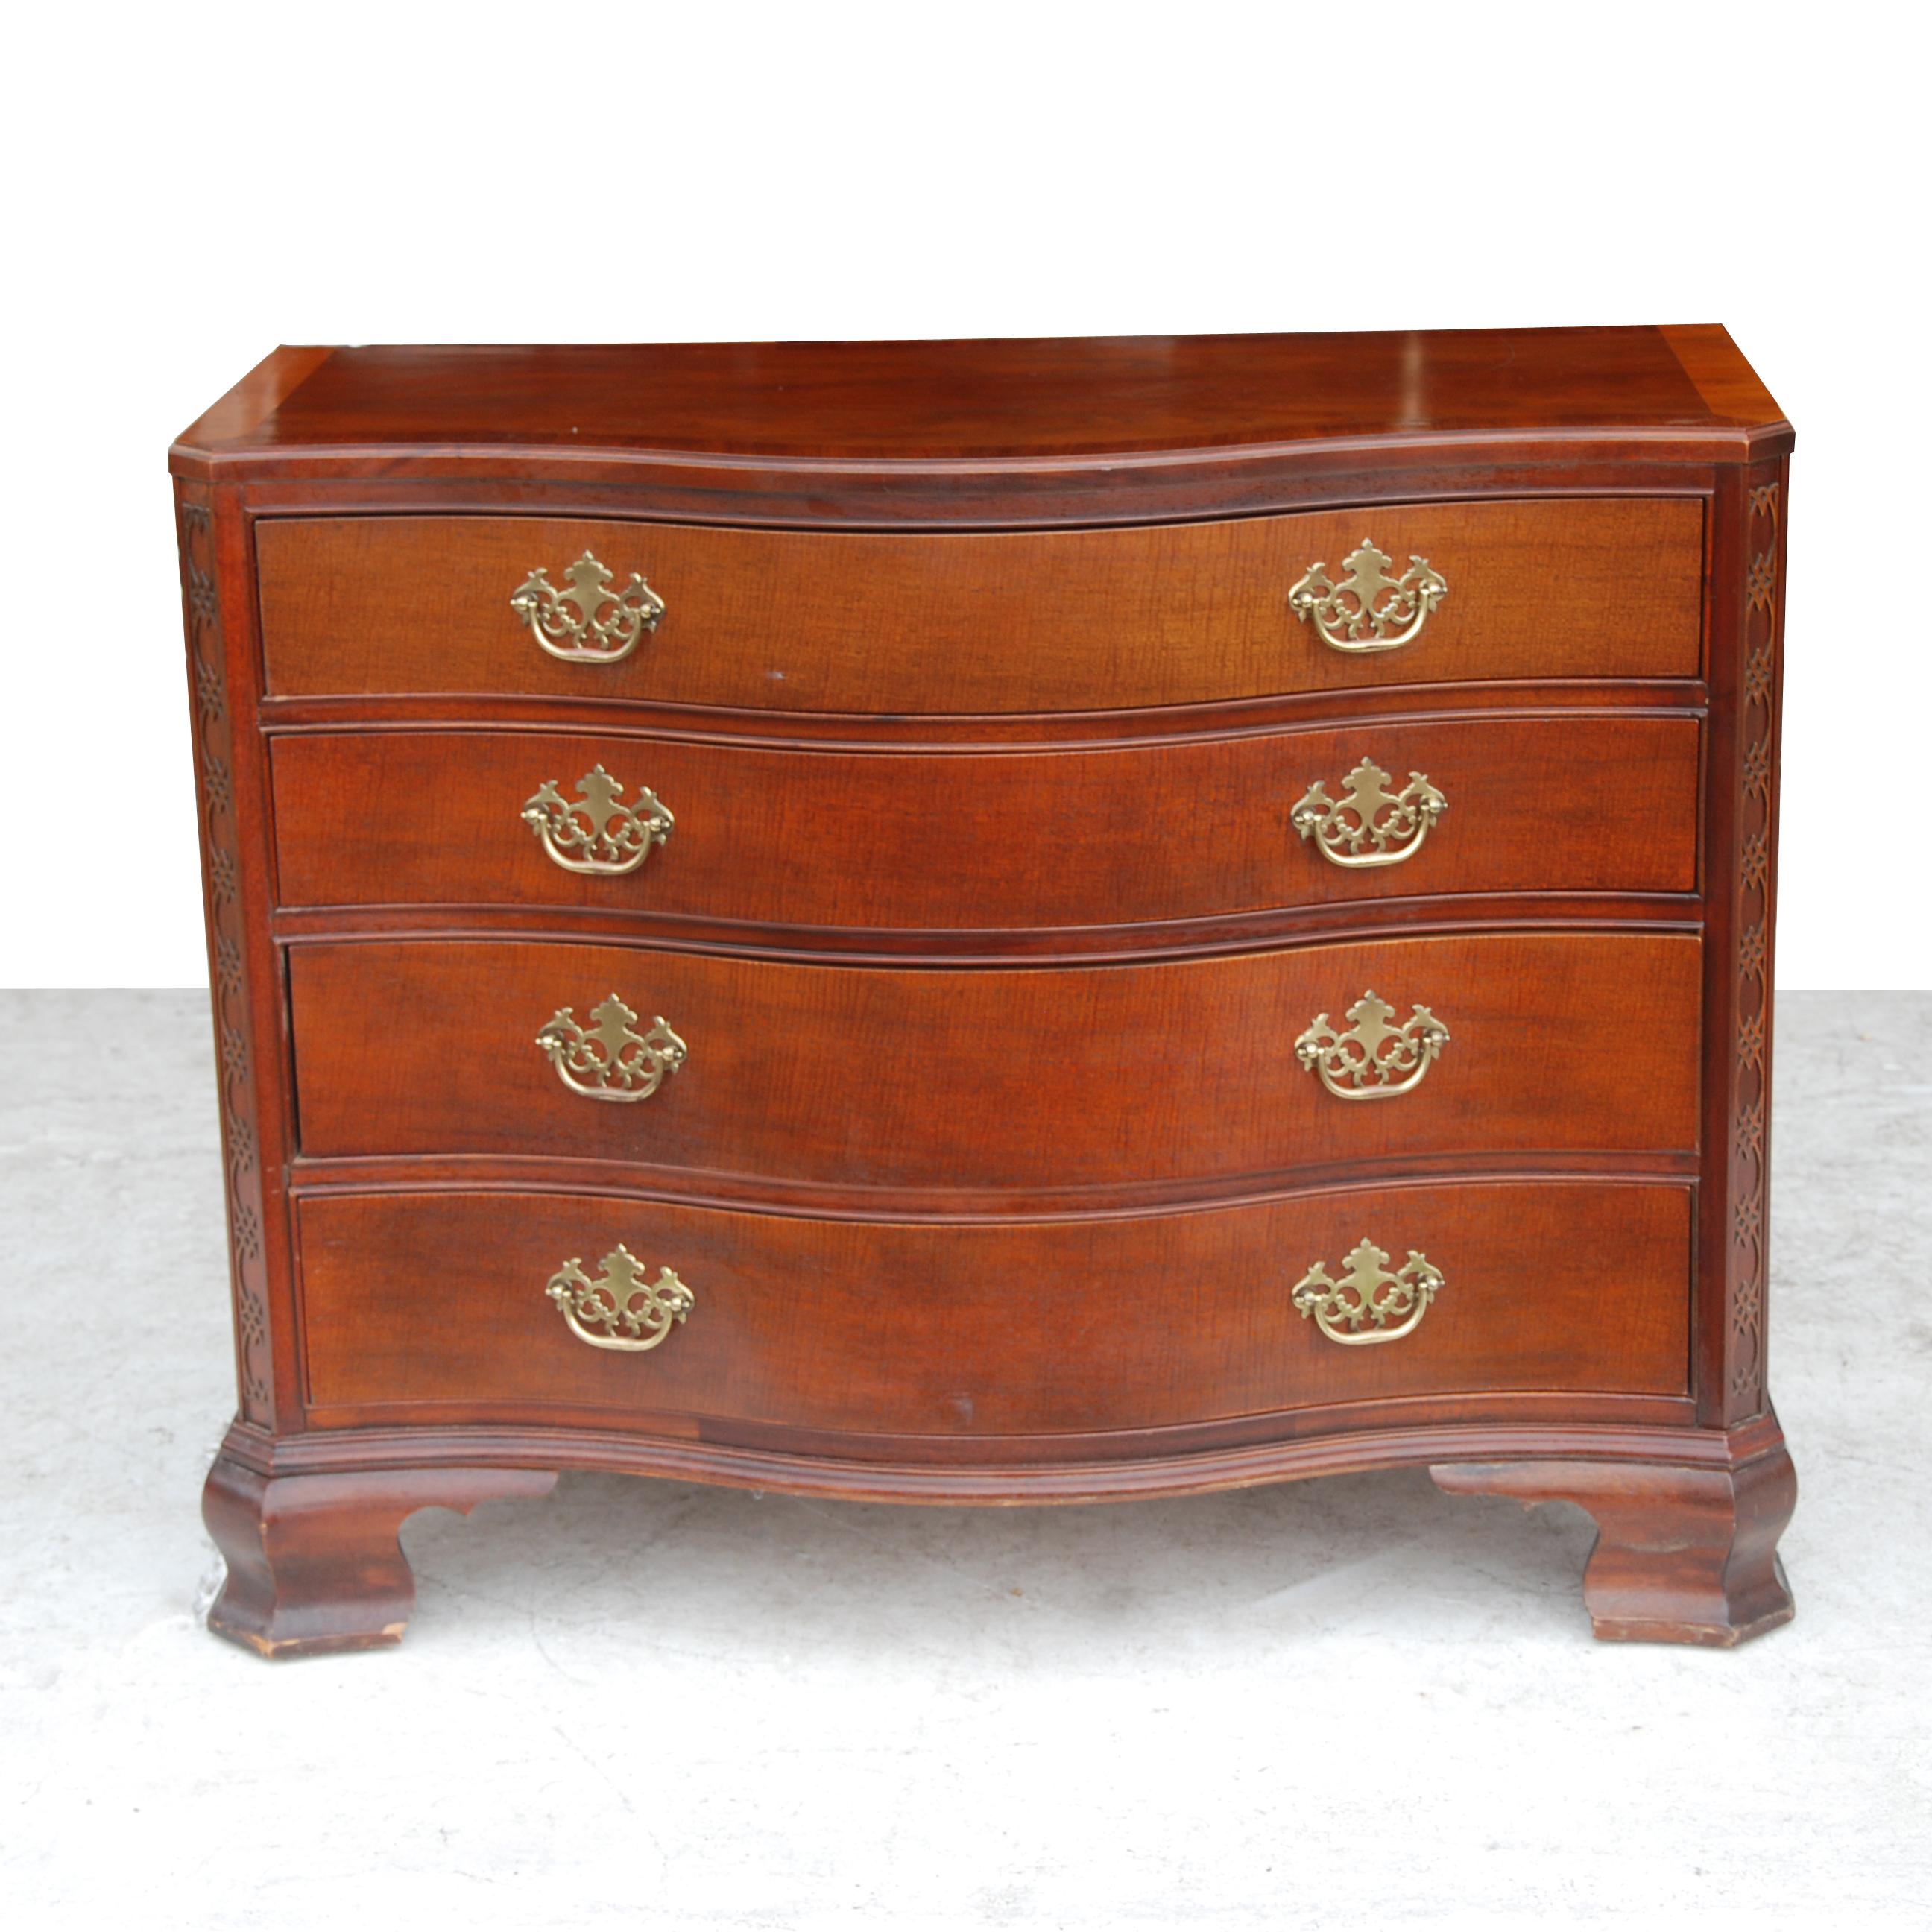 er.
Baker honors Charleston's heritage and its rich history by reproducing this 19th century Chippendale chest of drawers.
Part of their “Historic Charleston” collection the top has a hand carved gadroon border that adds elegant sophistication to